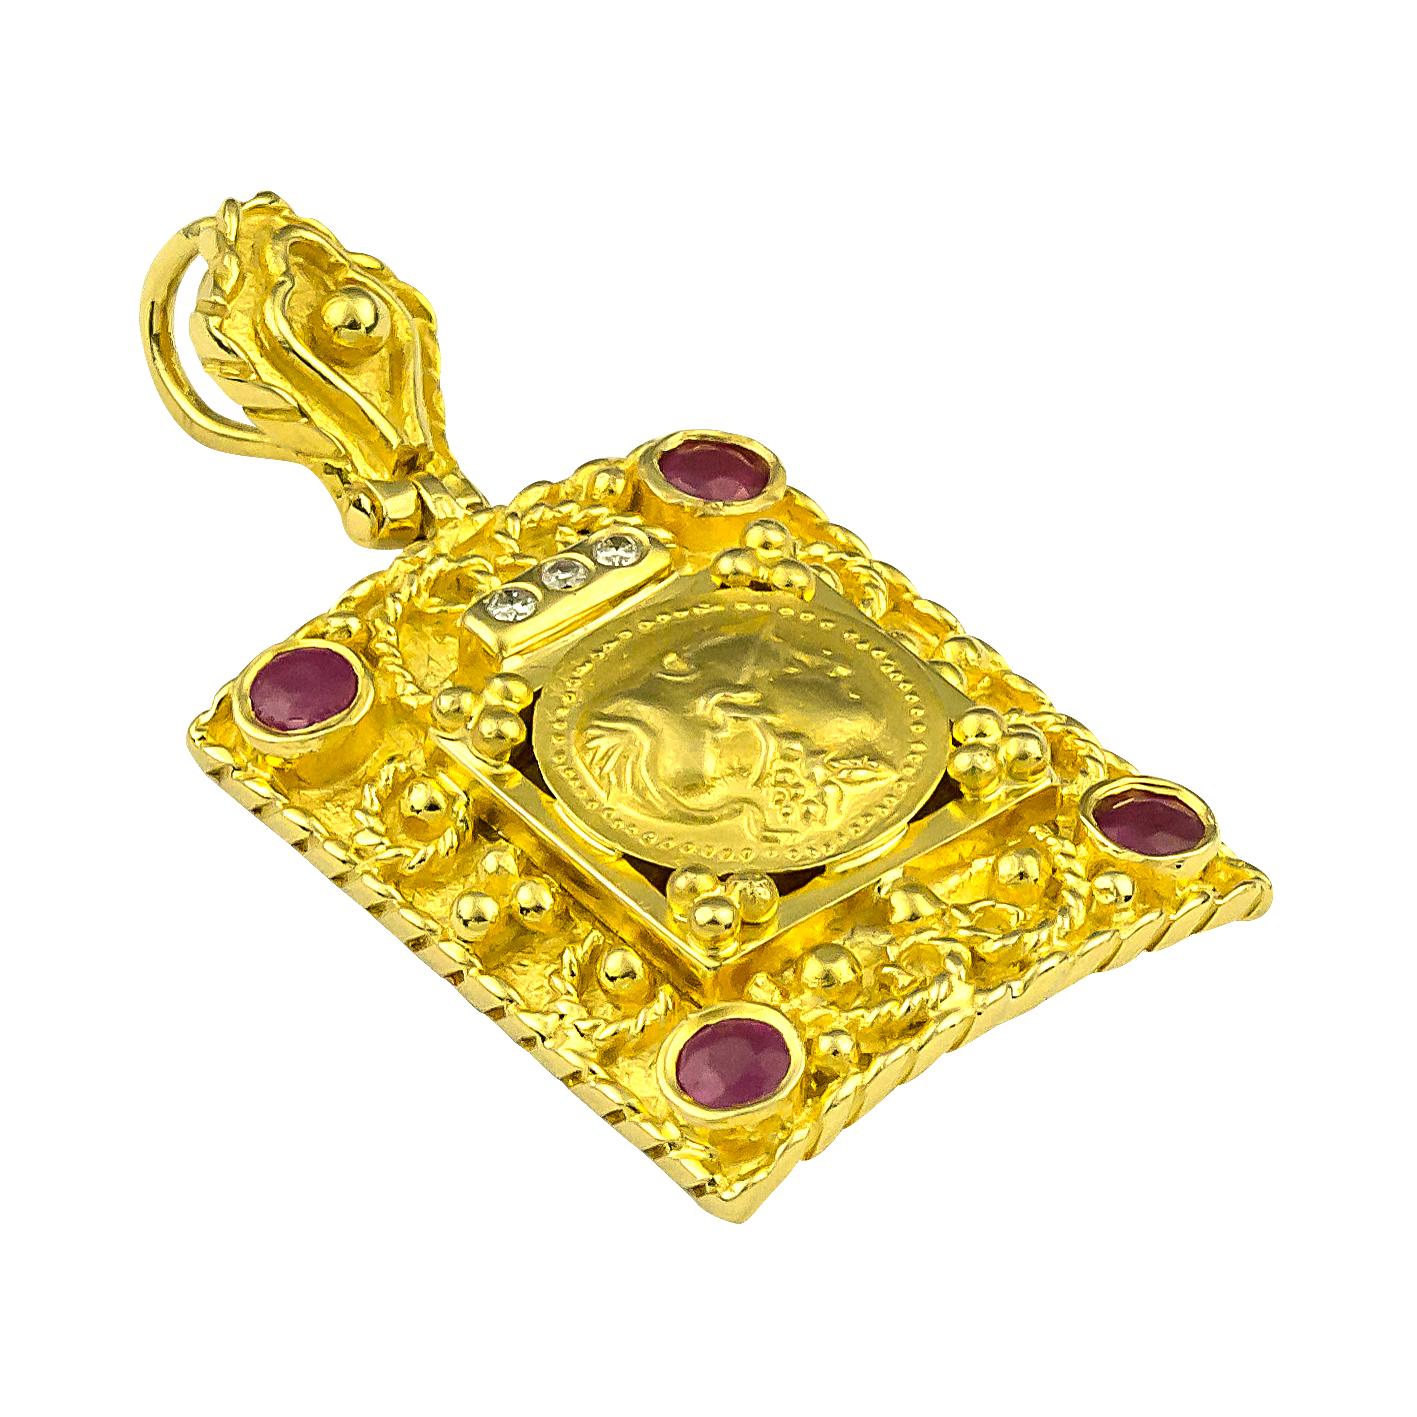 S.Georgios Designer 18 Karat Yellow Gold Coin Pendant all handmade and features a Gold Coin of Athena the Goddess and protector of Athens, and also known as the symbol of knowledge (the coin is an exact copy of the original). This gorgeous Coin